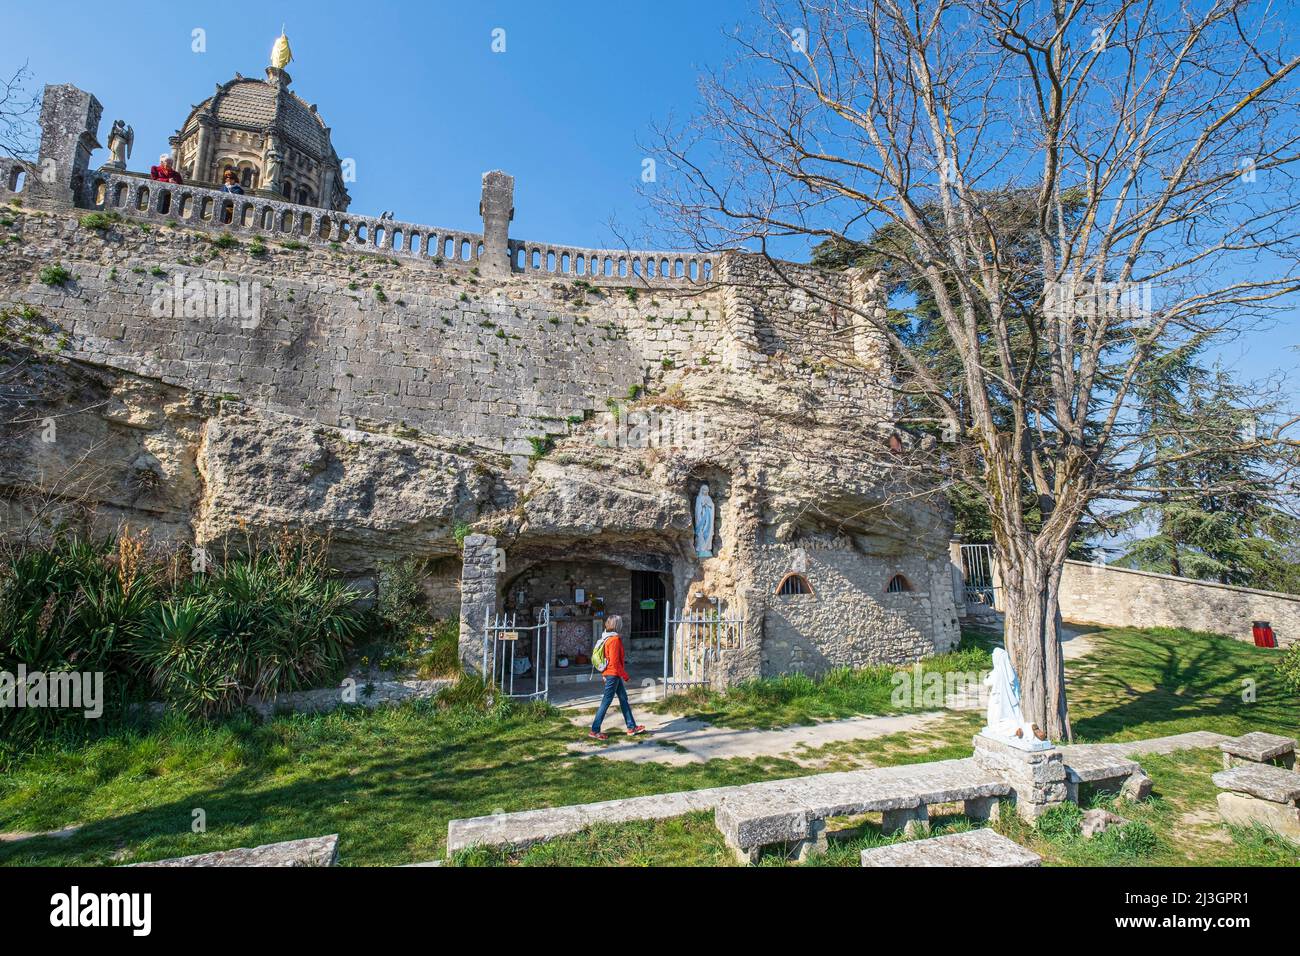 France, Alpes-de-Haute-Provence, Luberon Regional Natural Park, Forcalquier, the Citadel, Notre-Dame de Provence chapel in neo-Byzantine style erected in 1875 Stock Photo